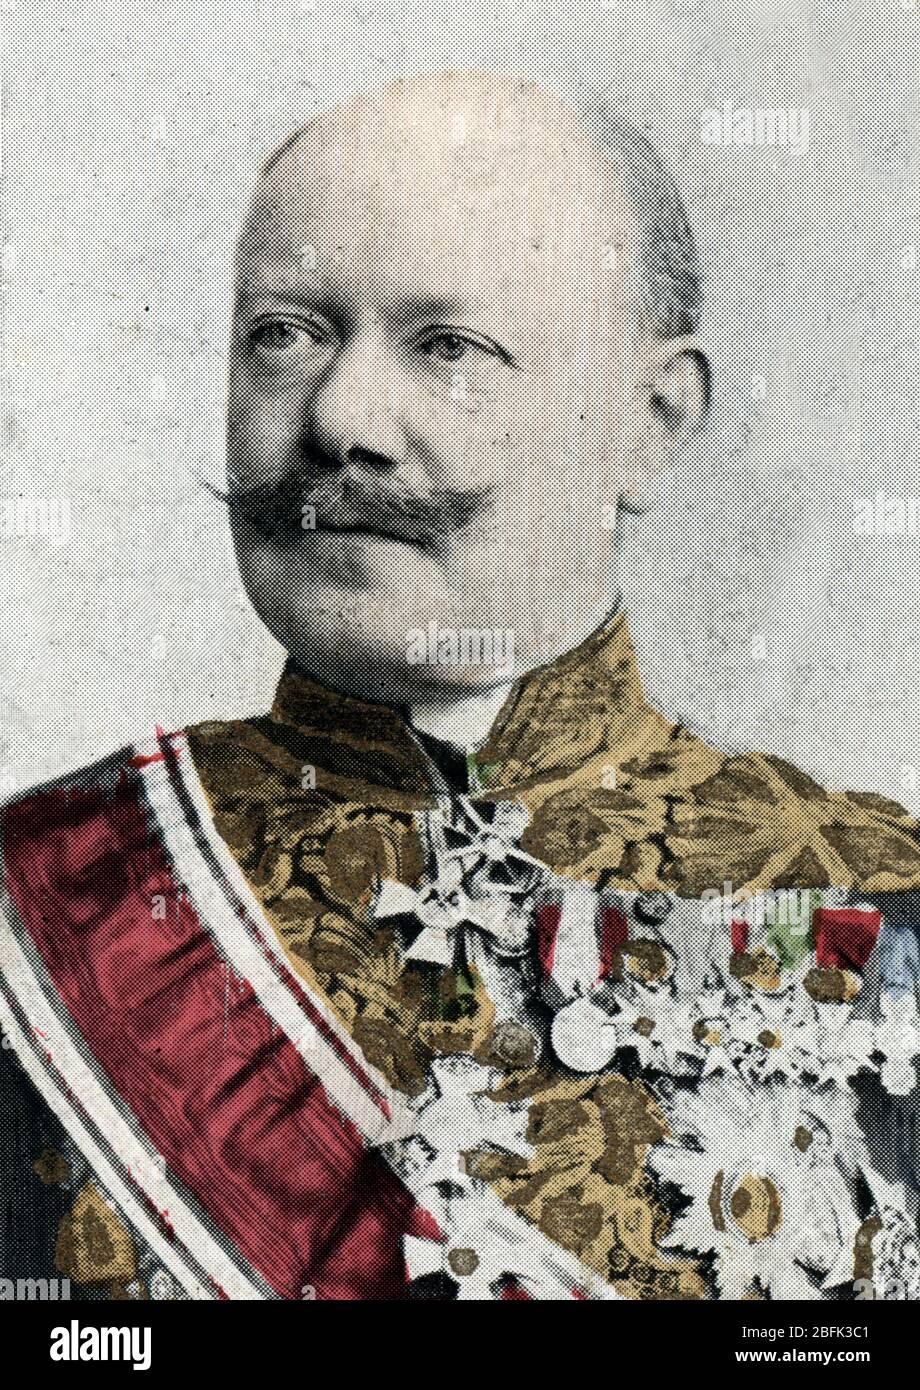 Portrait of Count Mikhail Nikolayevich Muraviev (Comte Michel Nicolaievitch Mouravieff) (Mourawief) (1845-1900), Russian politician Chromolithographie Stock Photo